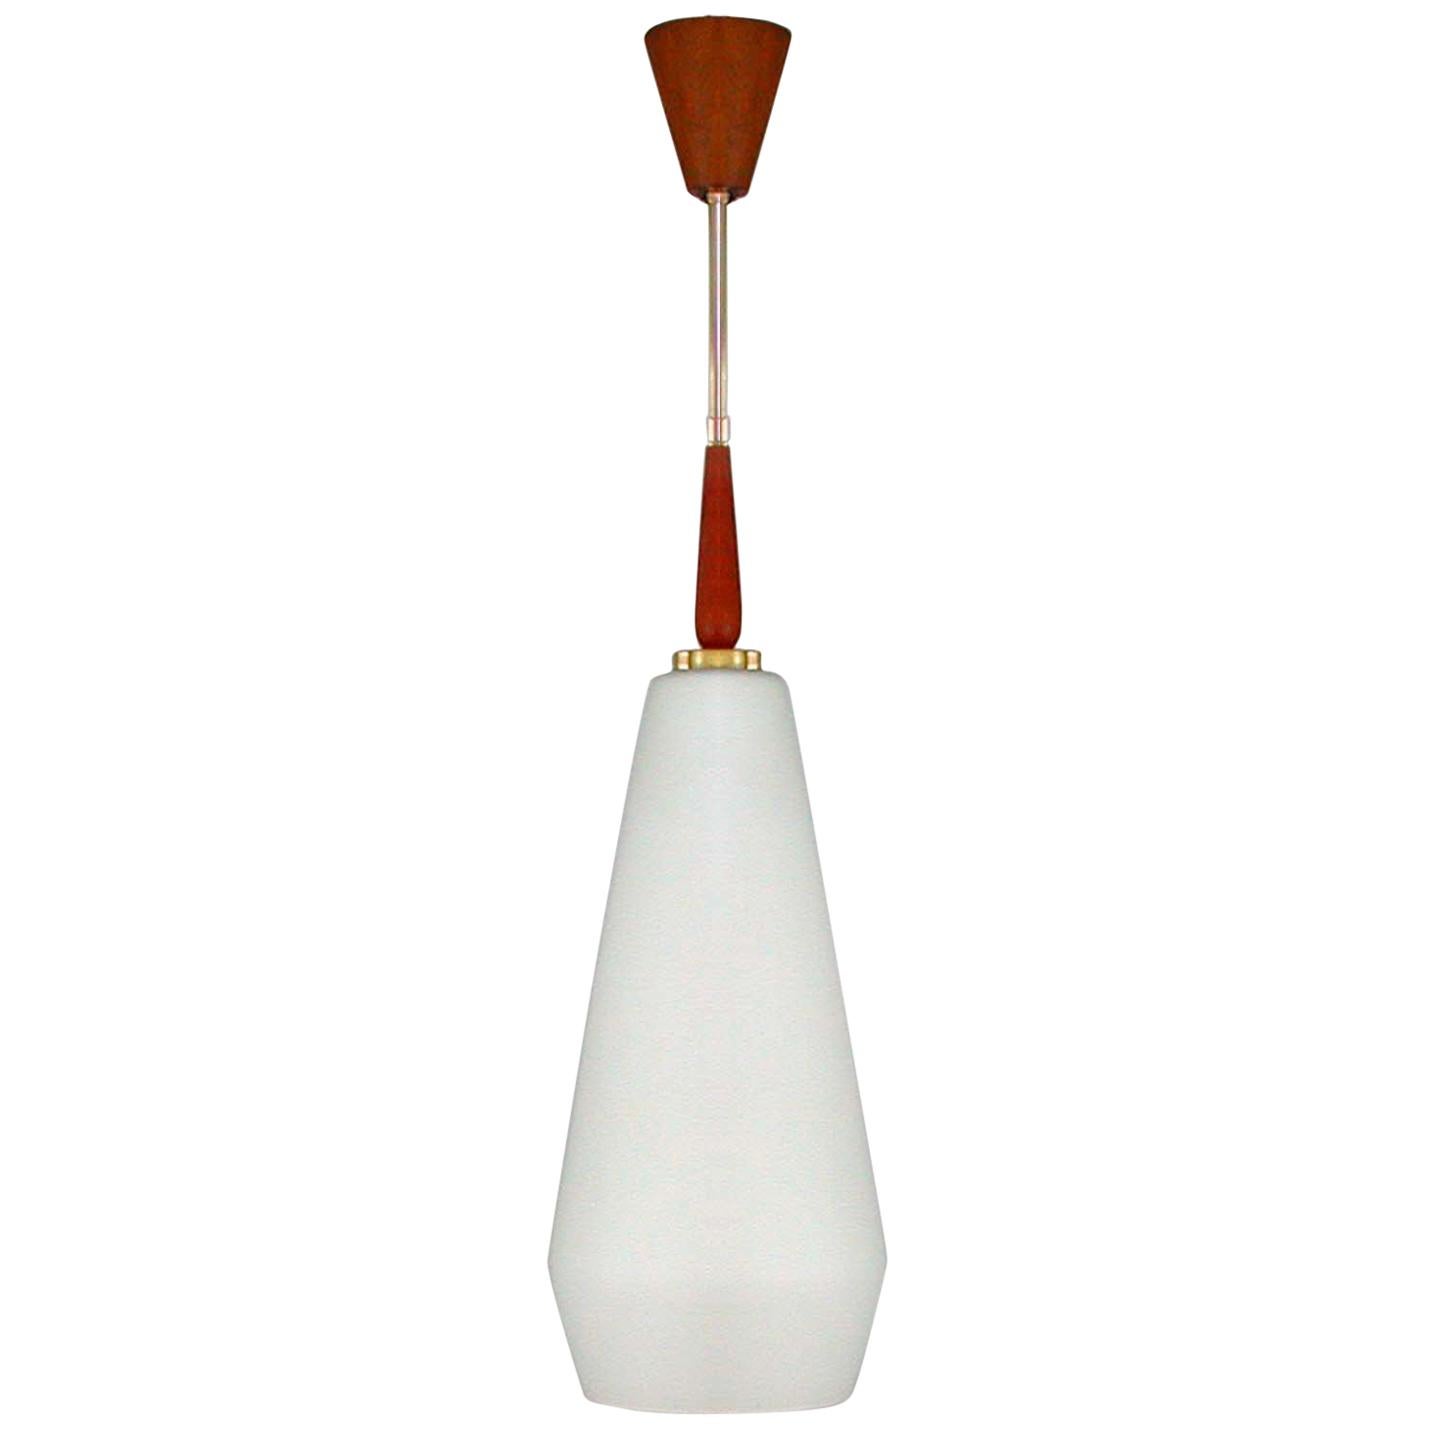 This large Mid-Century Modern pendant was designed and manufactured in Sweden in the 1960s and is attributed to Luxus Vittsjö. Very elegant style influenced by the upcoming Space Age. 

It has got a very large frosted opaline glass lamp shade with